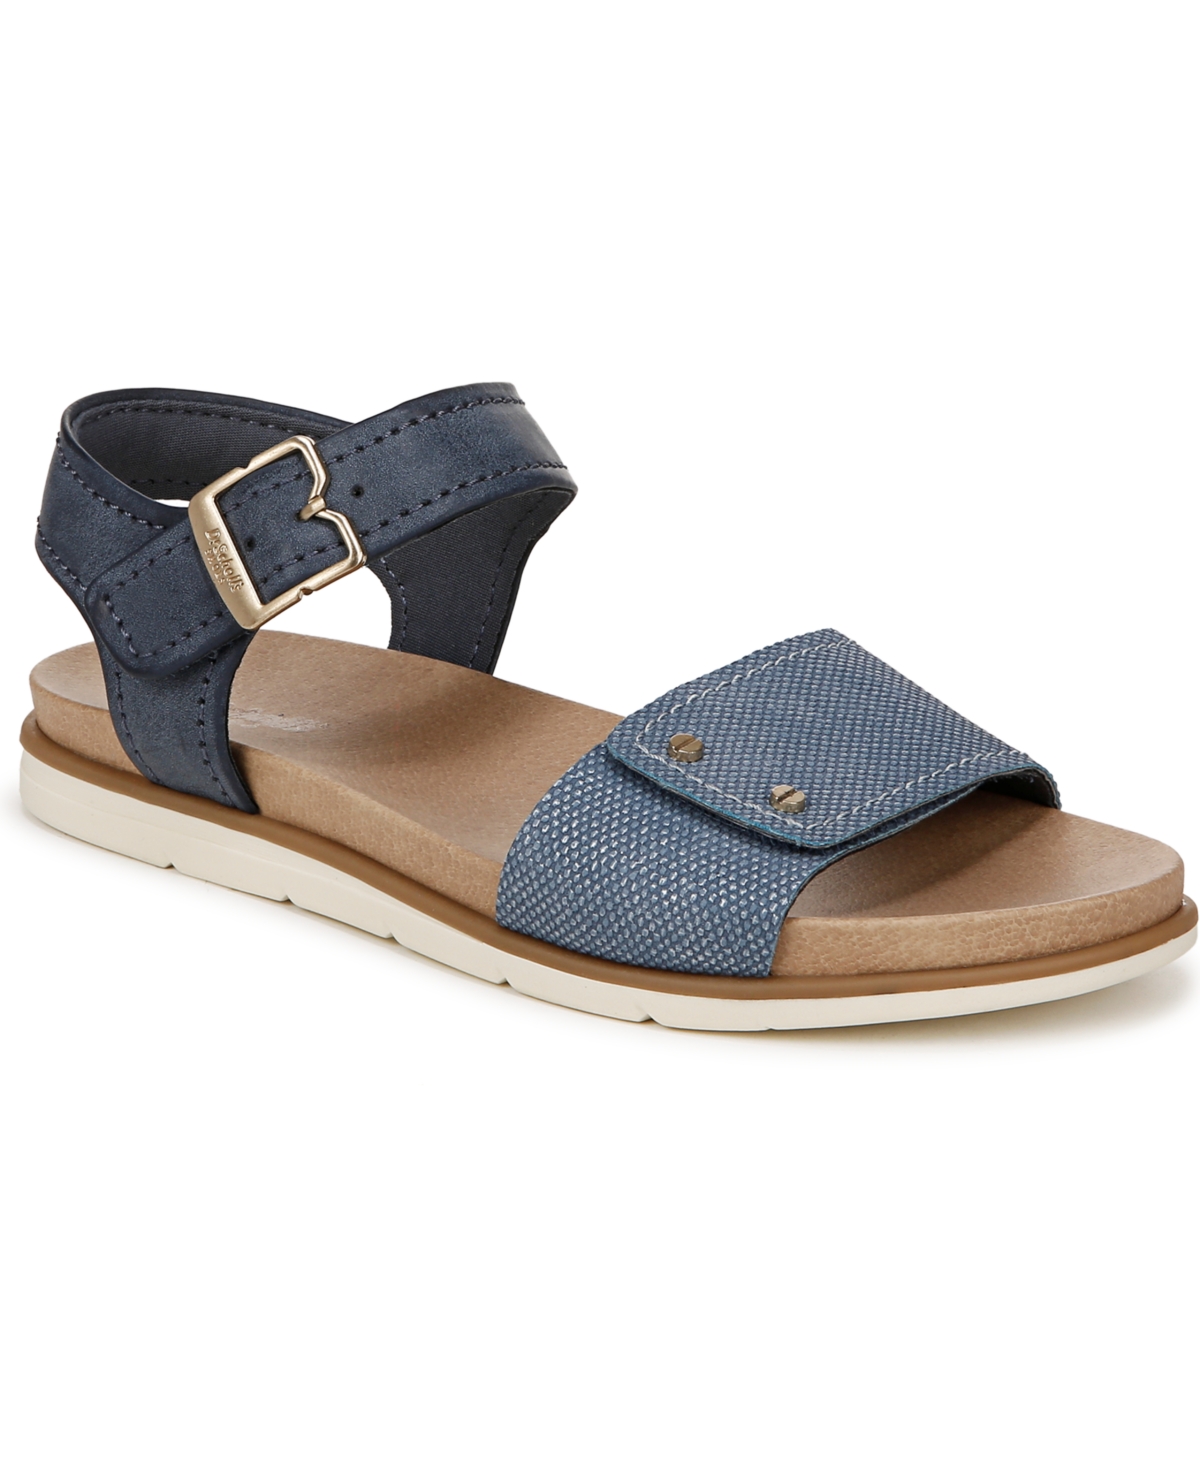 Women's Nicely Sun Ankle Strap Sandals - Oxide Blue Faux Leather